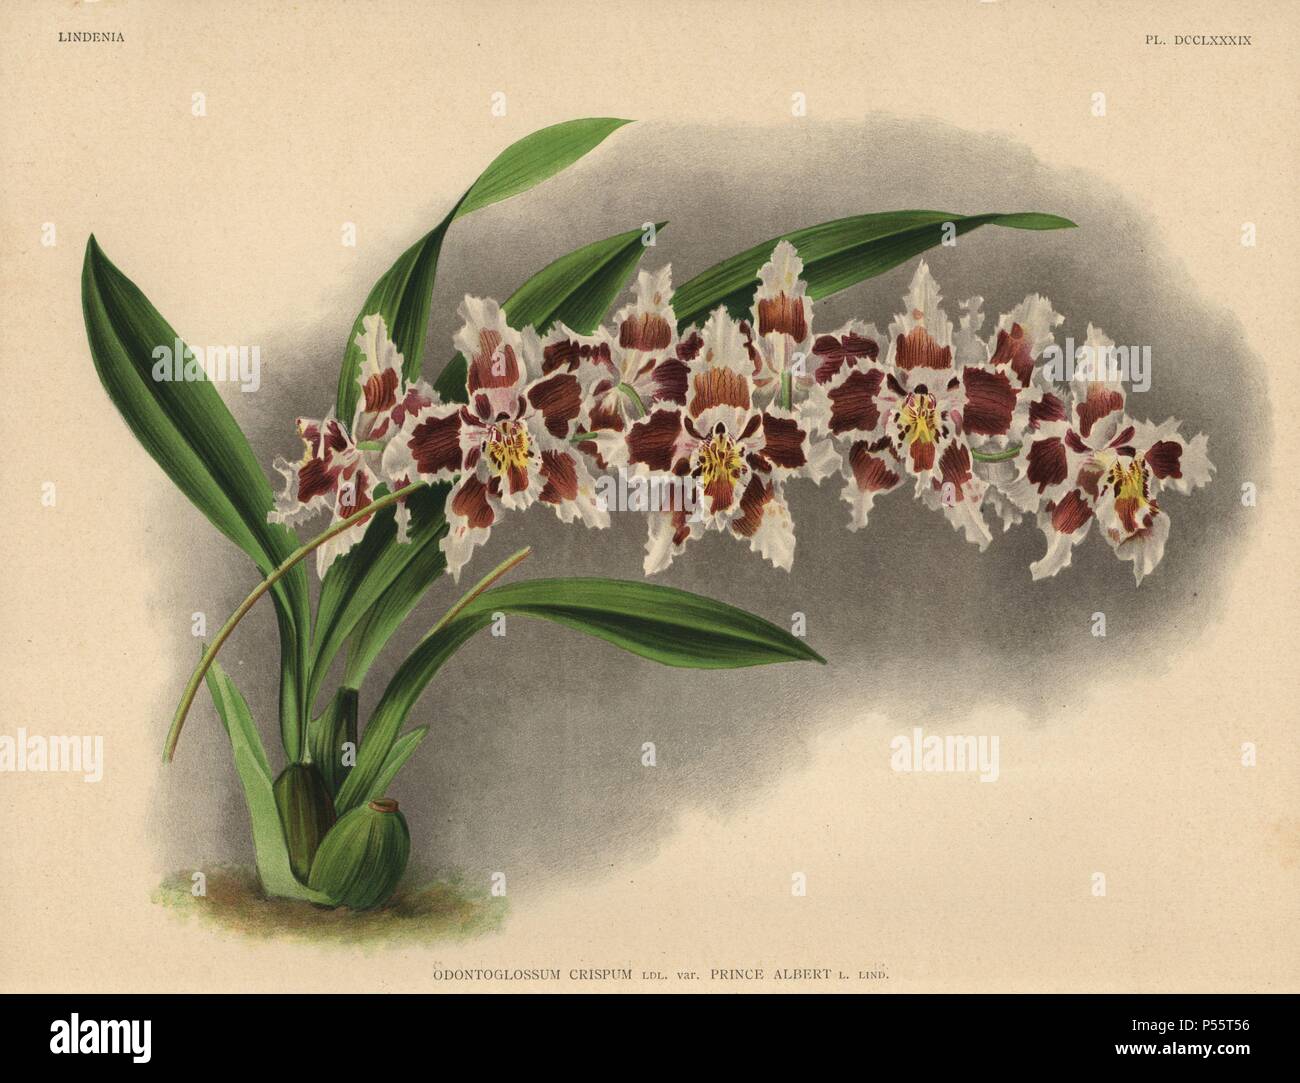 Prince Albert variety of Odontoglossum crispum orchid. Illustration drawn by C. de Bruyne and chromolithographed by P. de Pannemaeker et fils from Lucien Linden's 'Lindenia, Iconographie des Orchidees,' Brussels, 1902. Stock Photo